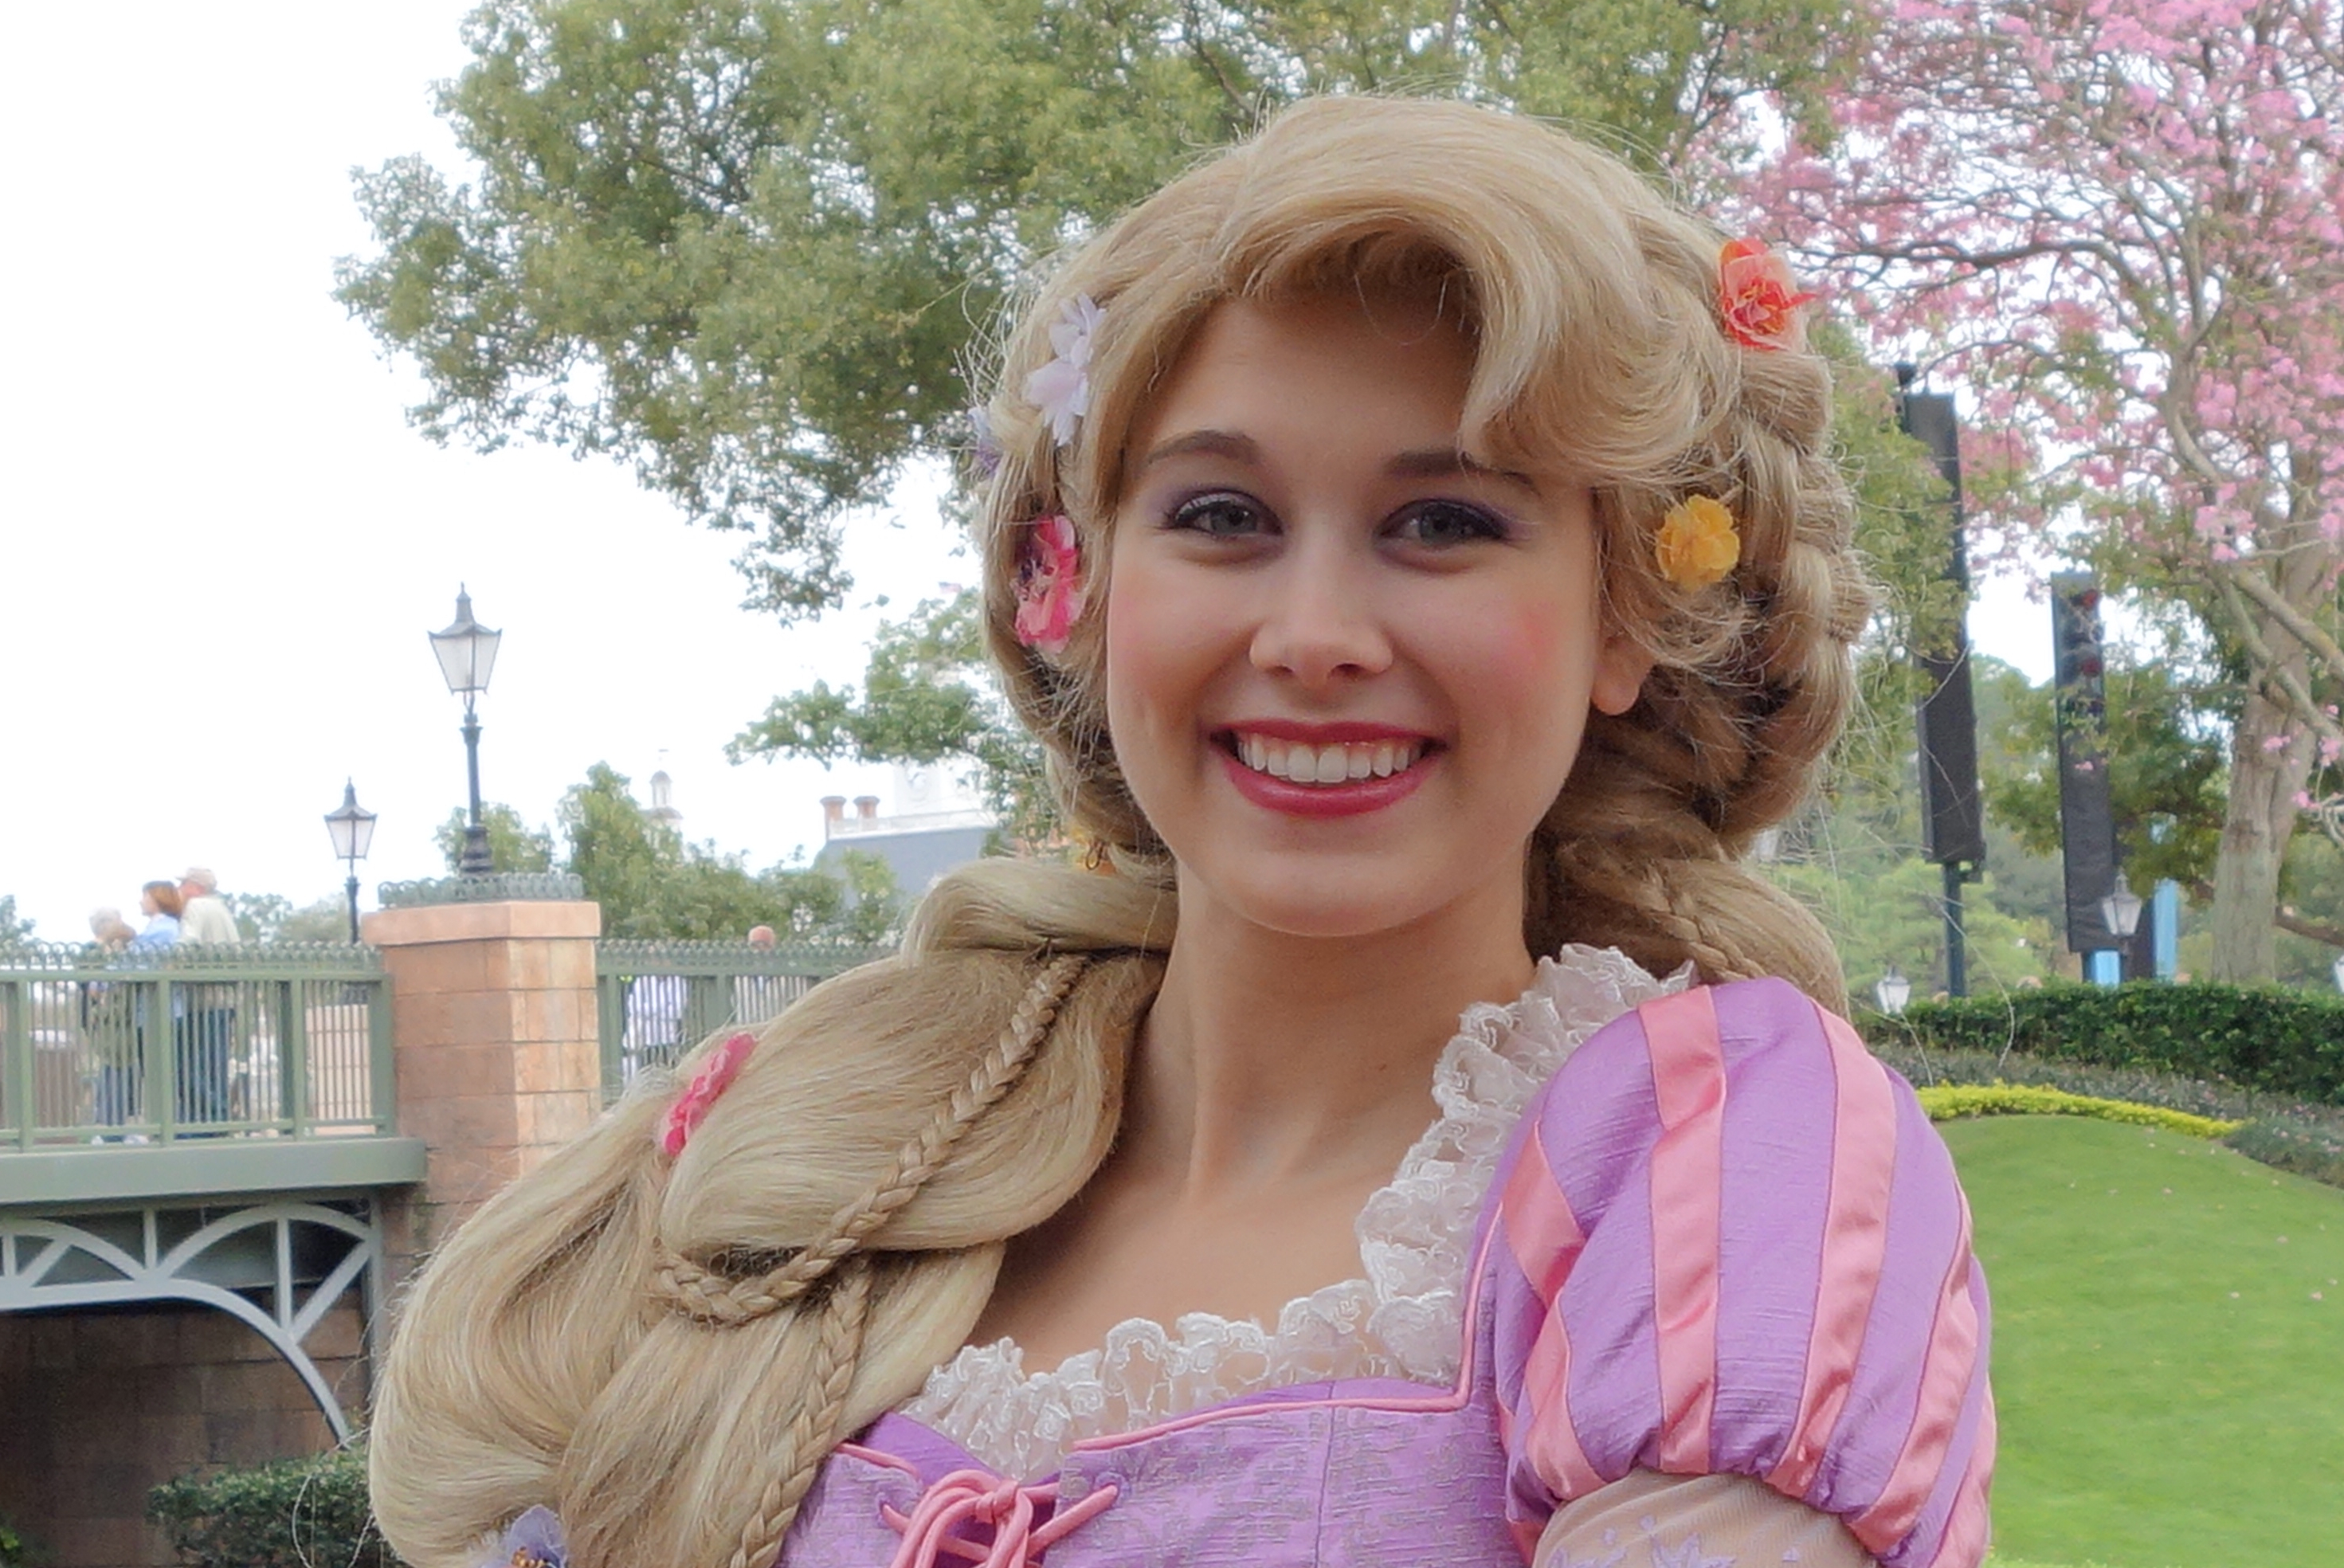 Rapunzel at the International Gateway in Epcot (training) 2013